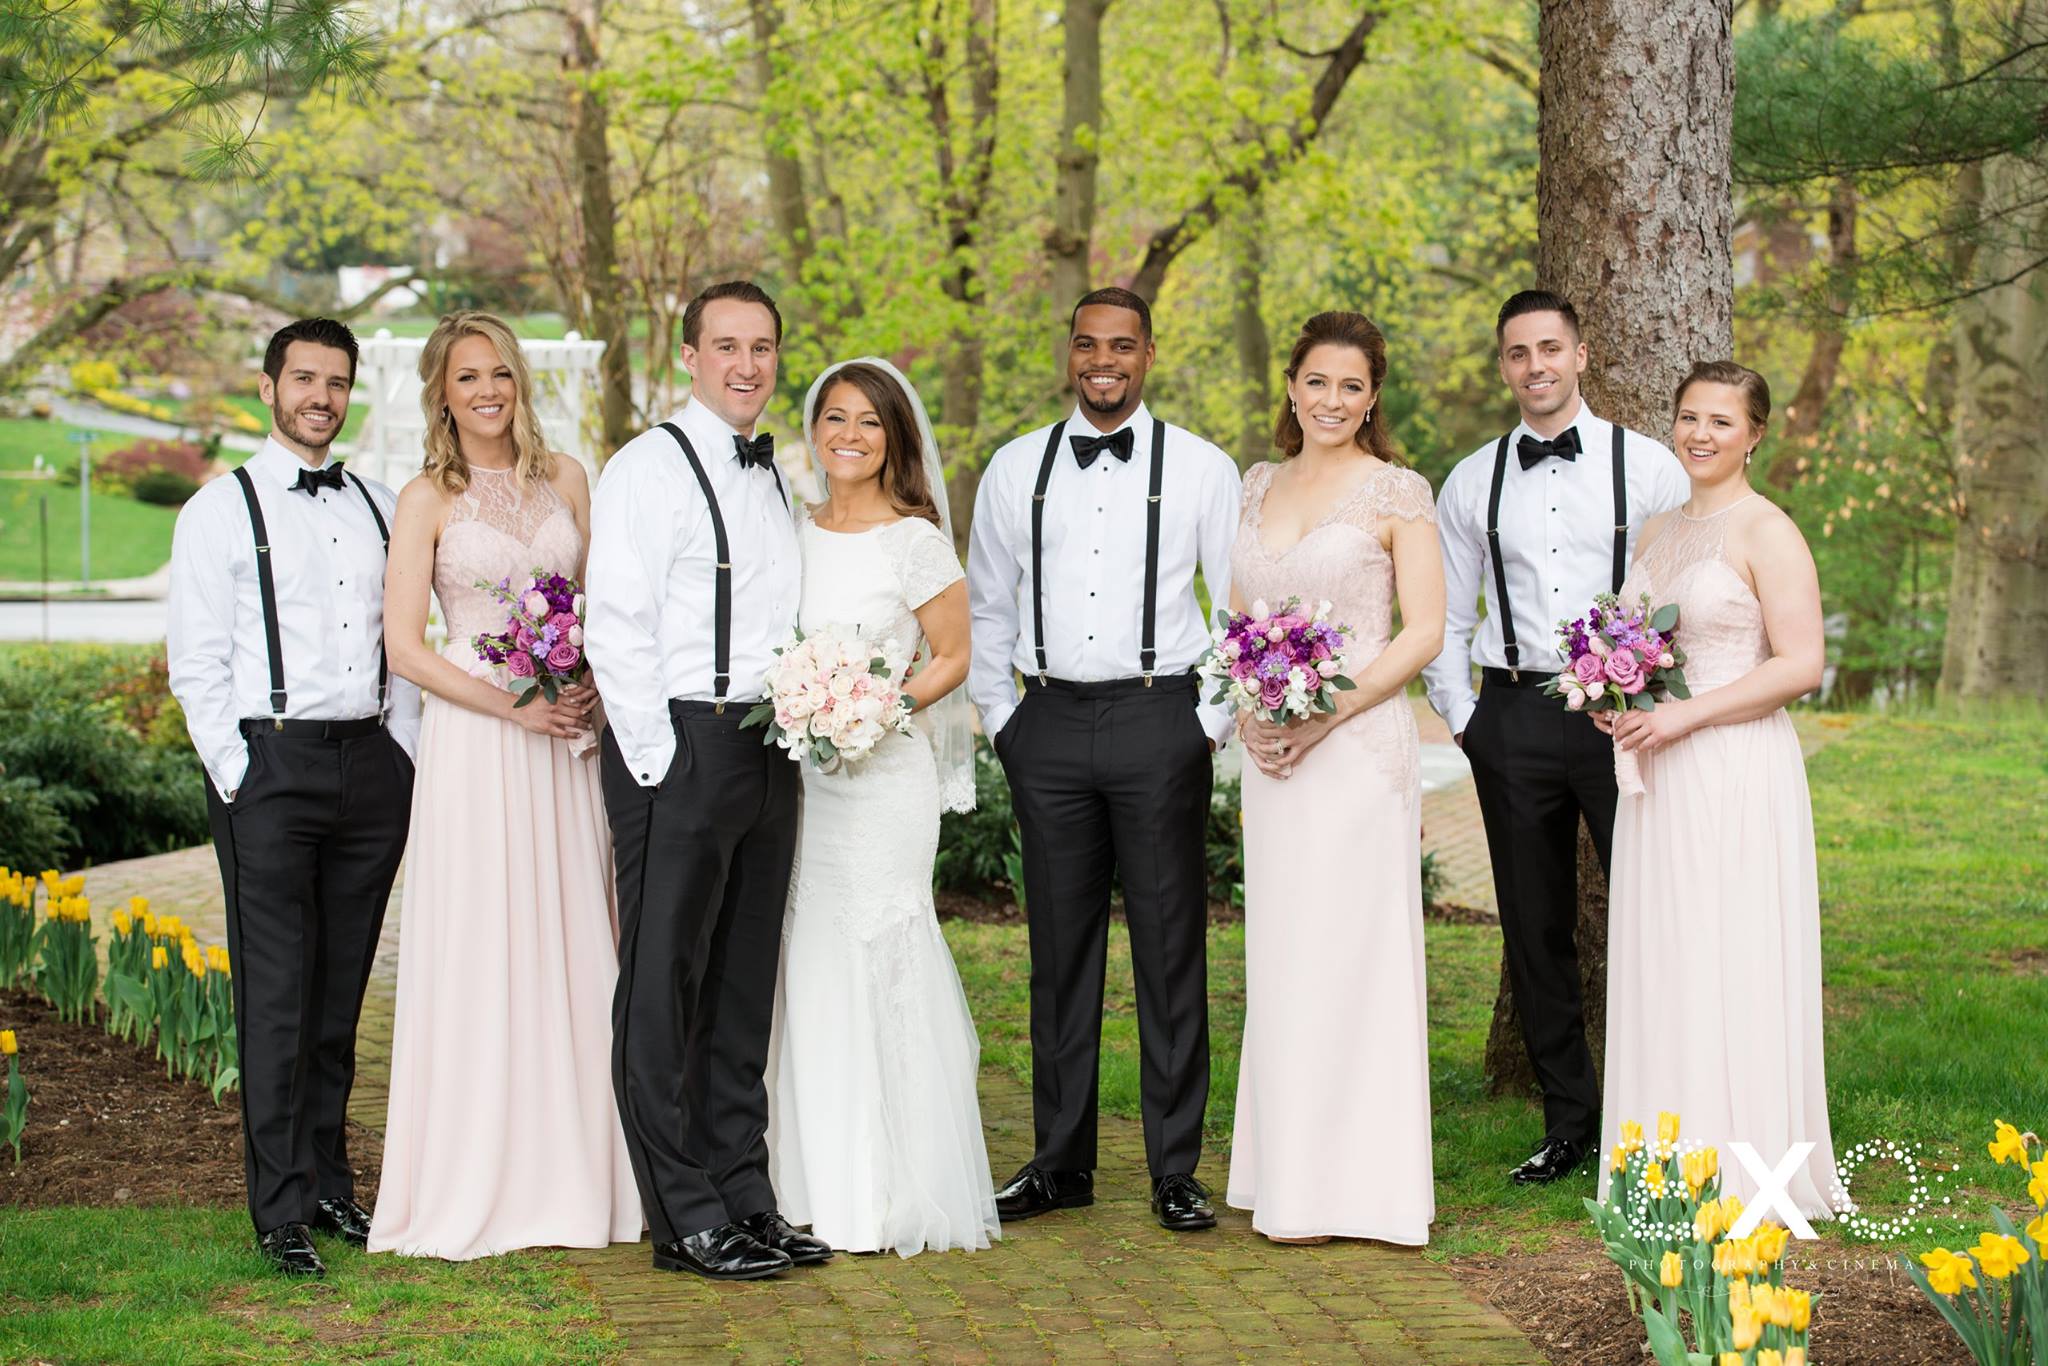 wedding party in green area at royalton mansion wearing Hayley paige dresses